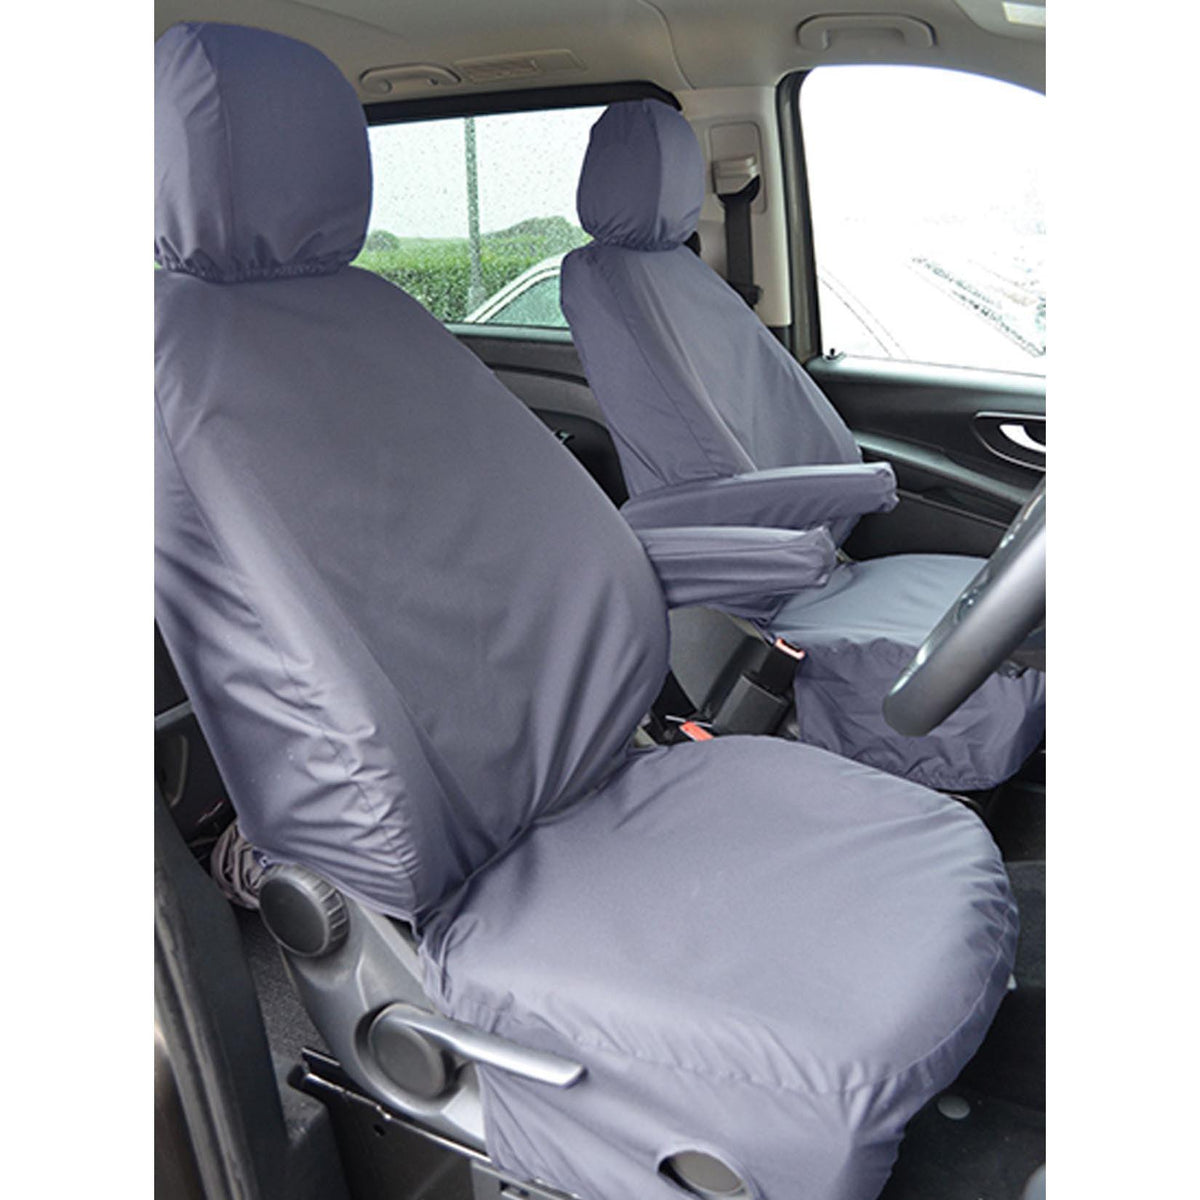 MERCEDES VITO 2015 ON FRONT SINGLE SEAT COVERS - GREY - Storm Xccessories2